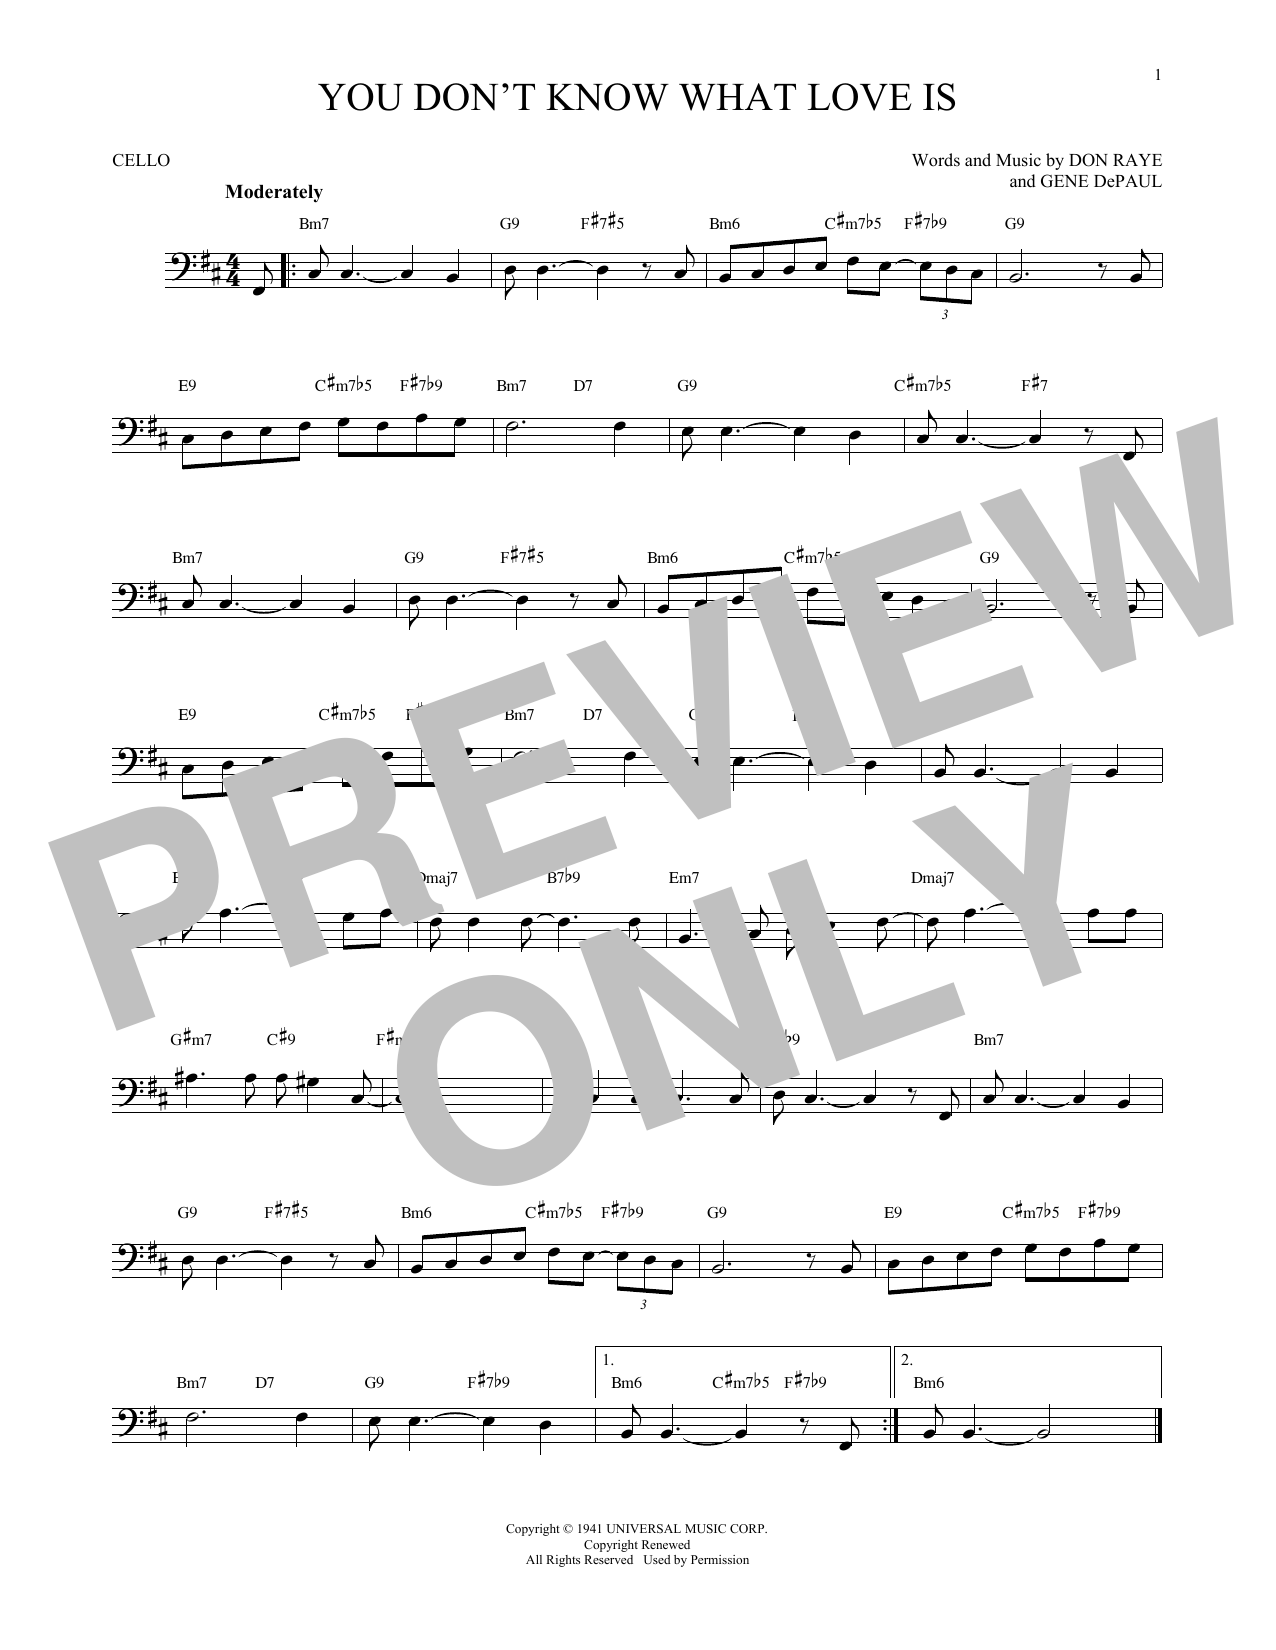 Download Don Raye You Don't Know What Love Is Sheet Music